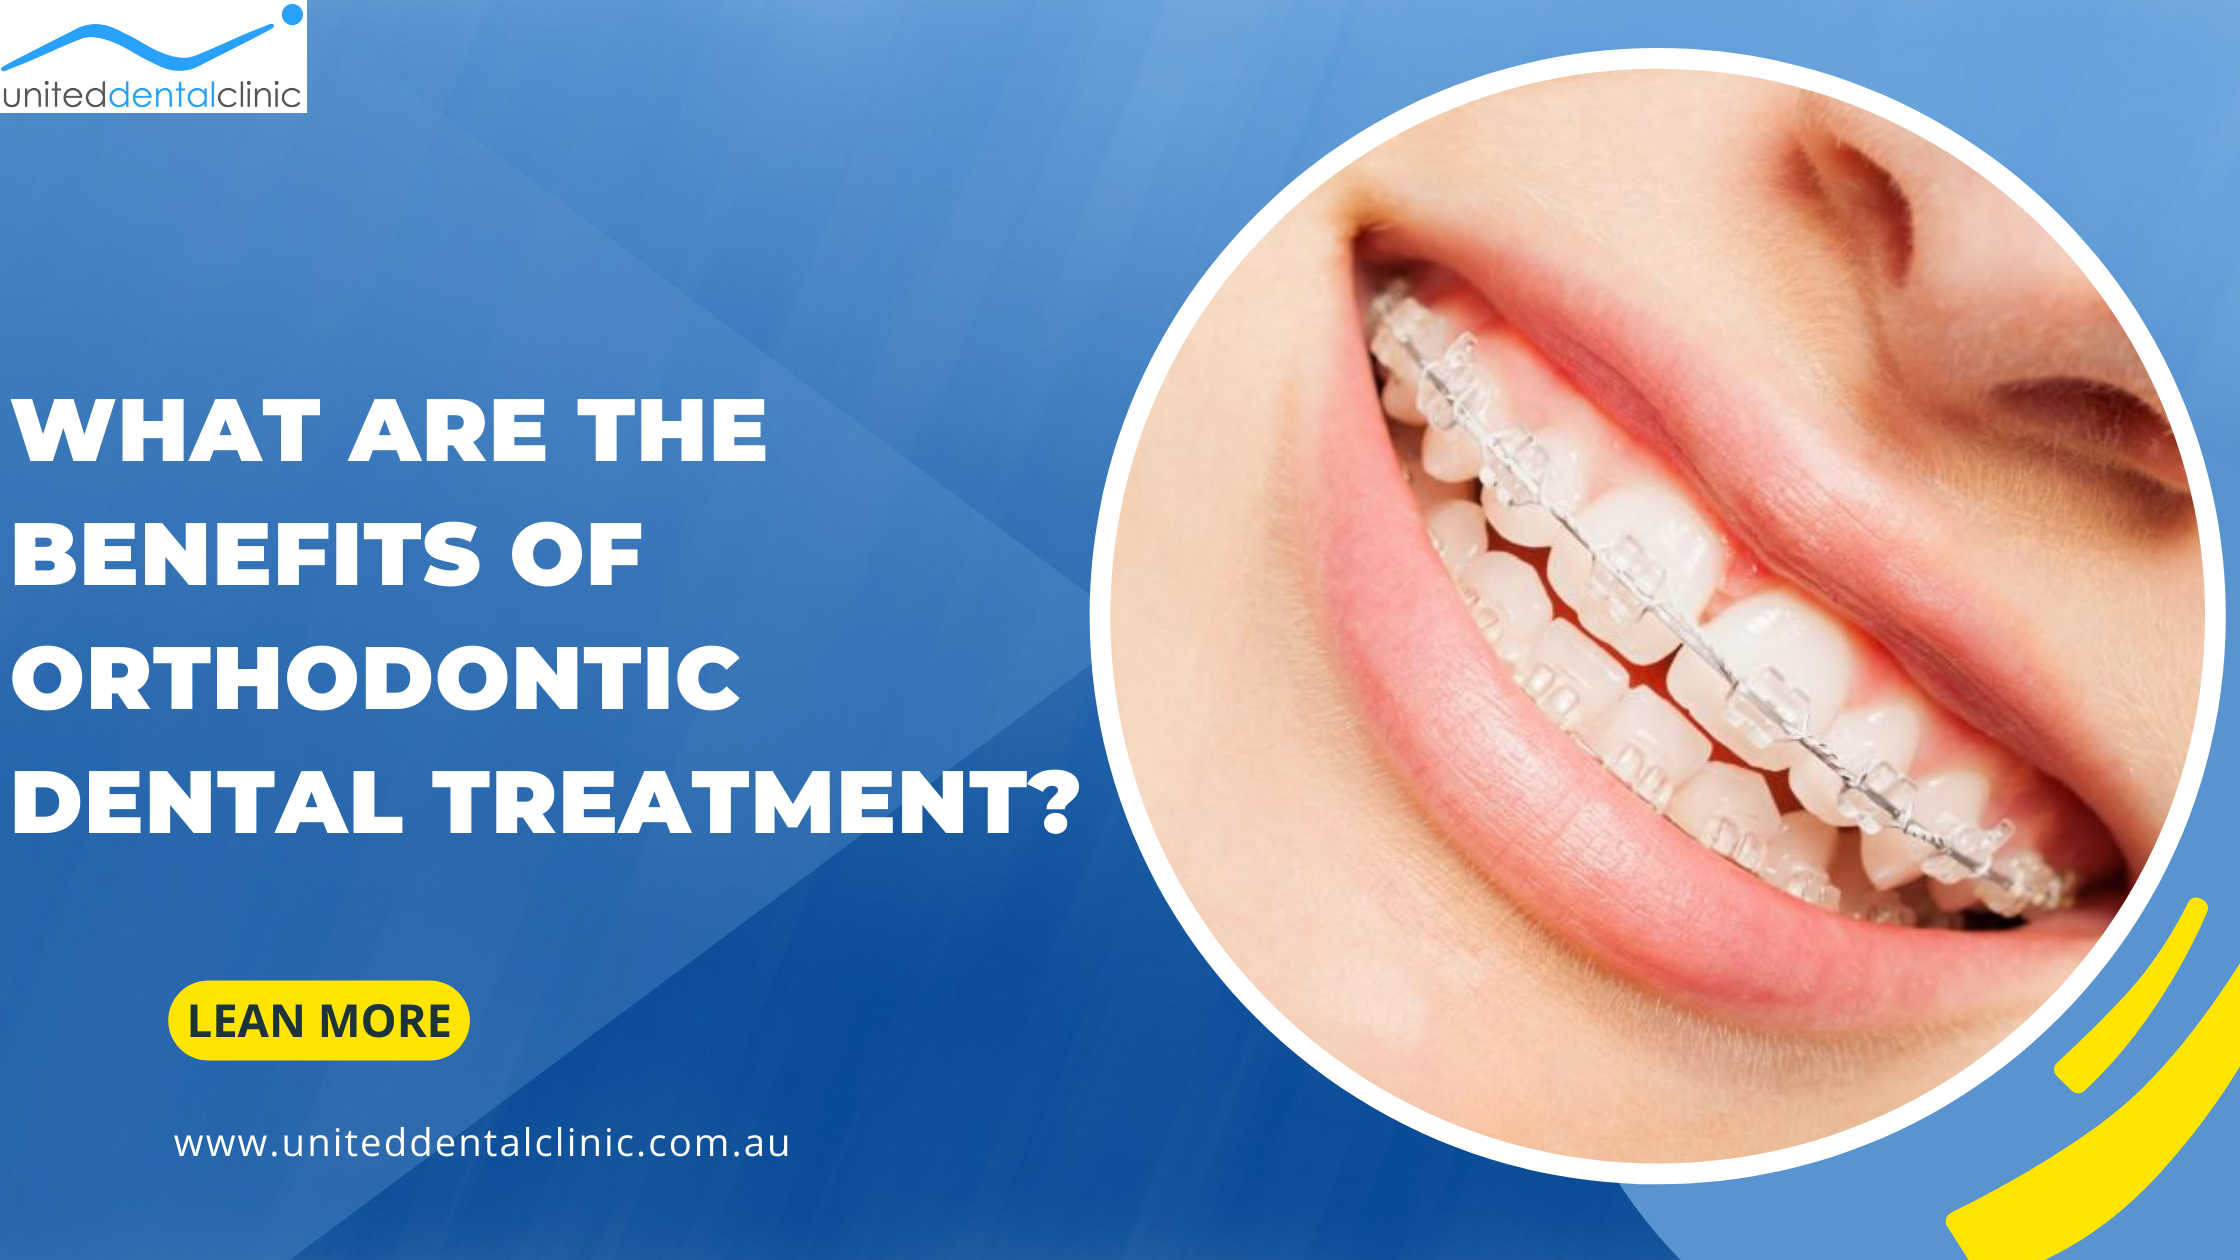 What Are The Benefits Of Orthodontic Dental Treatment?